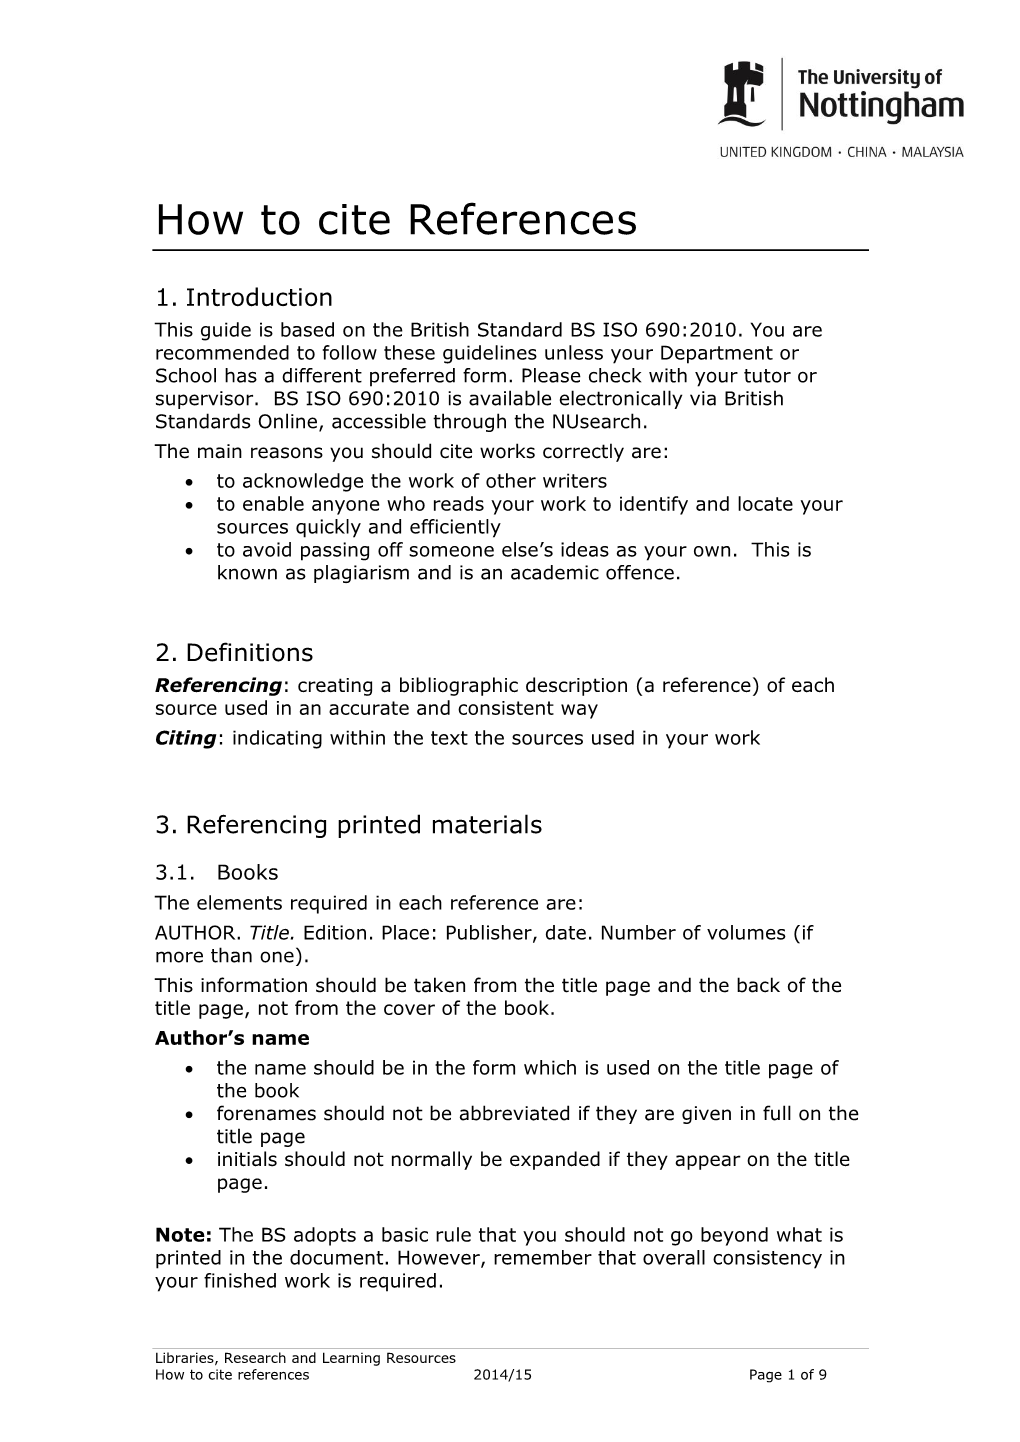 How to Cite References